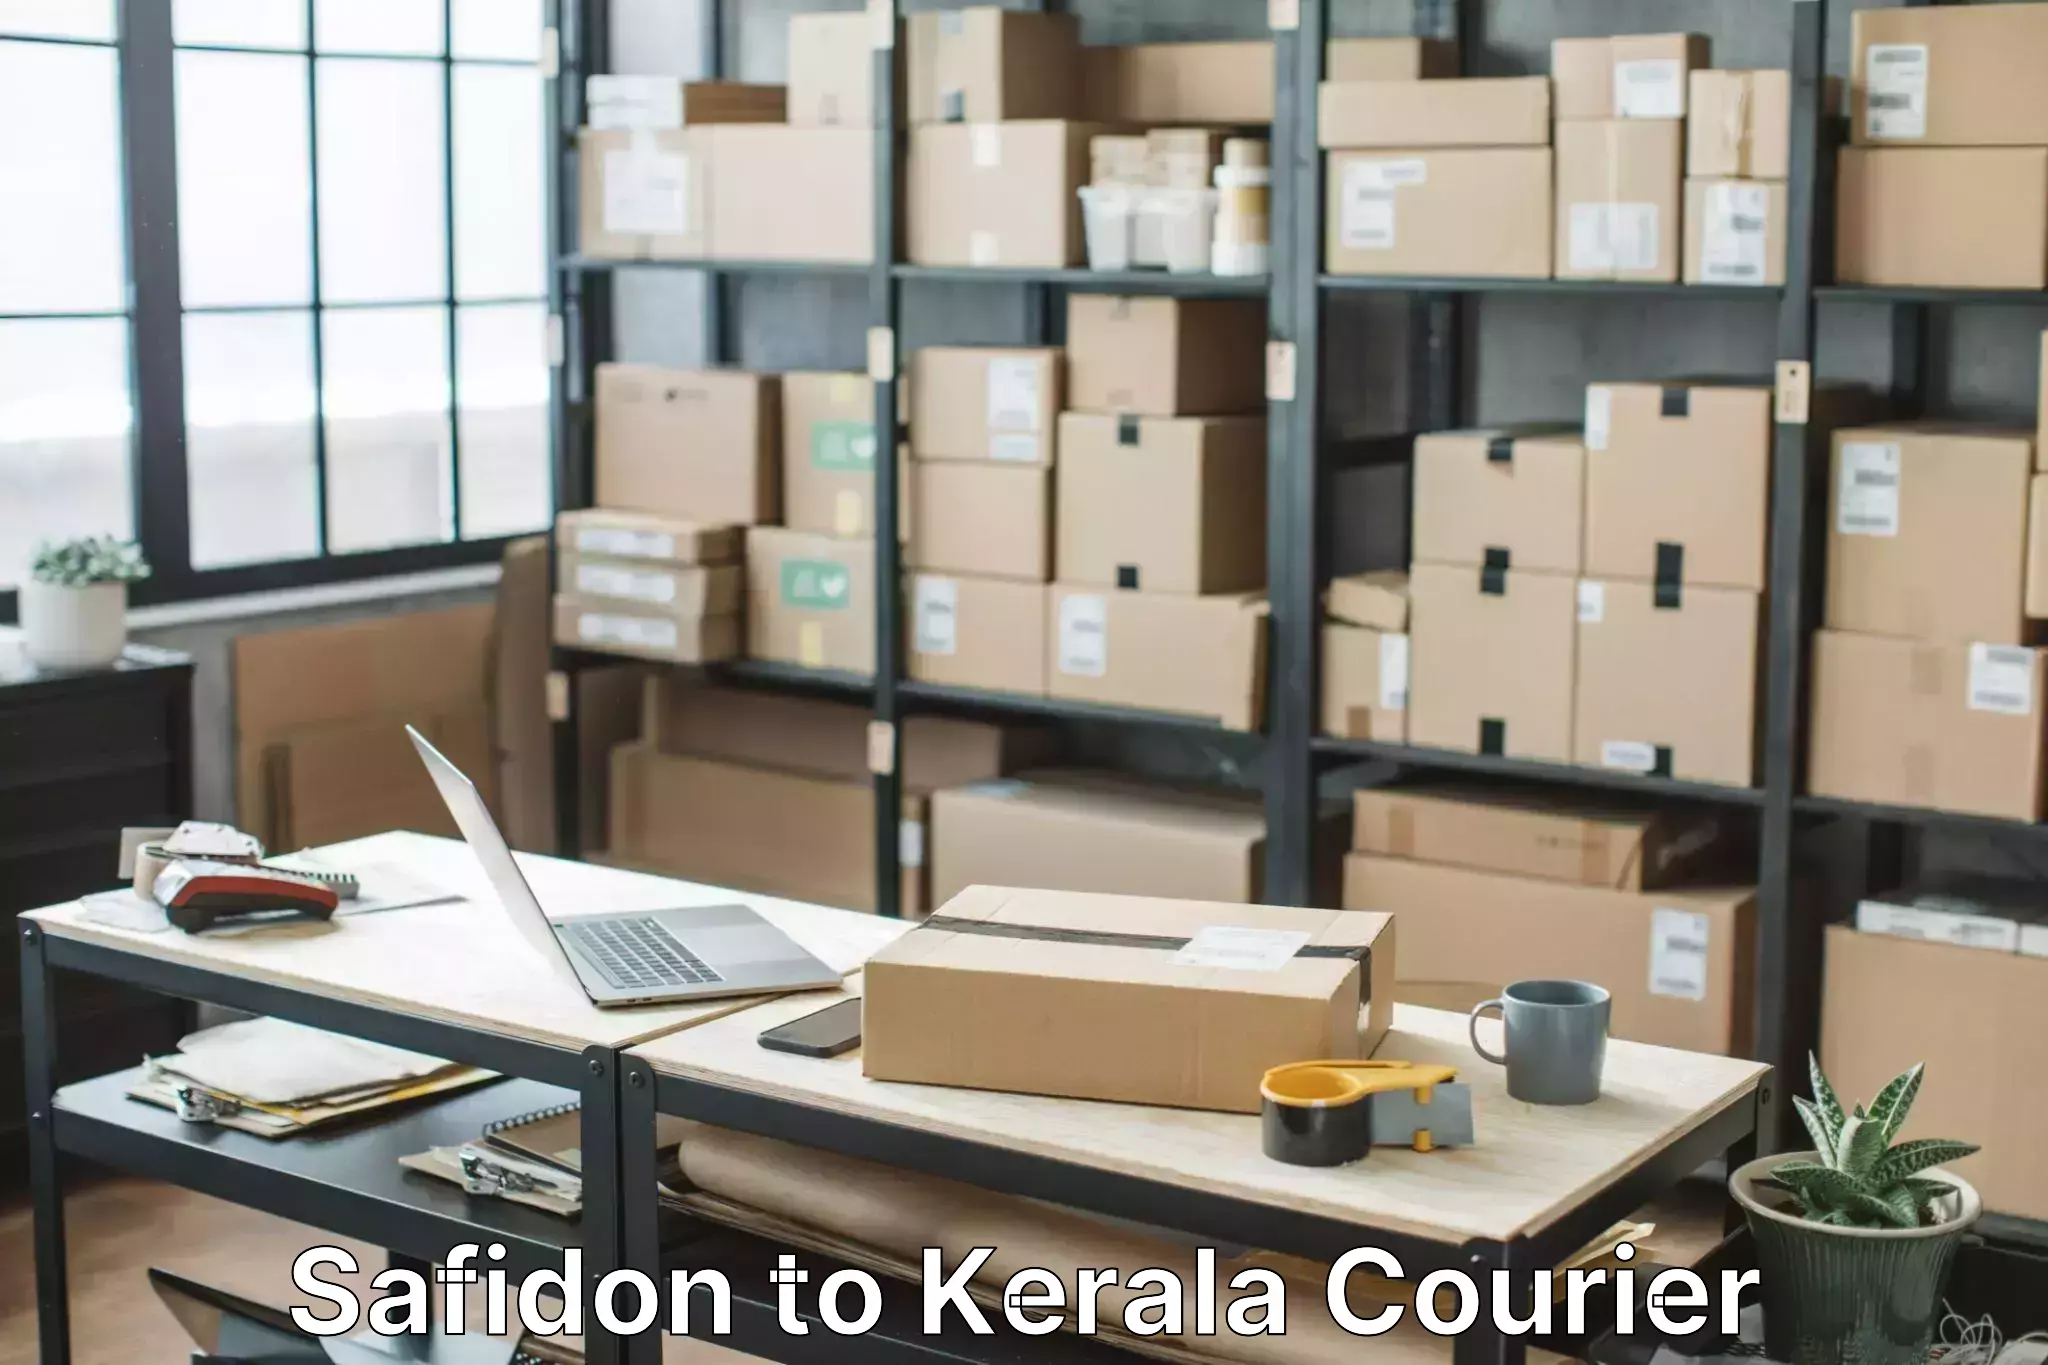 Trusted relocation experts Safidon to Kerala